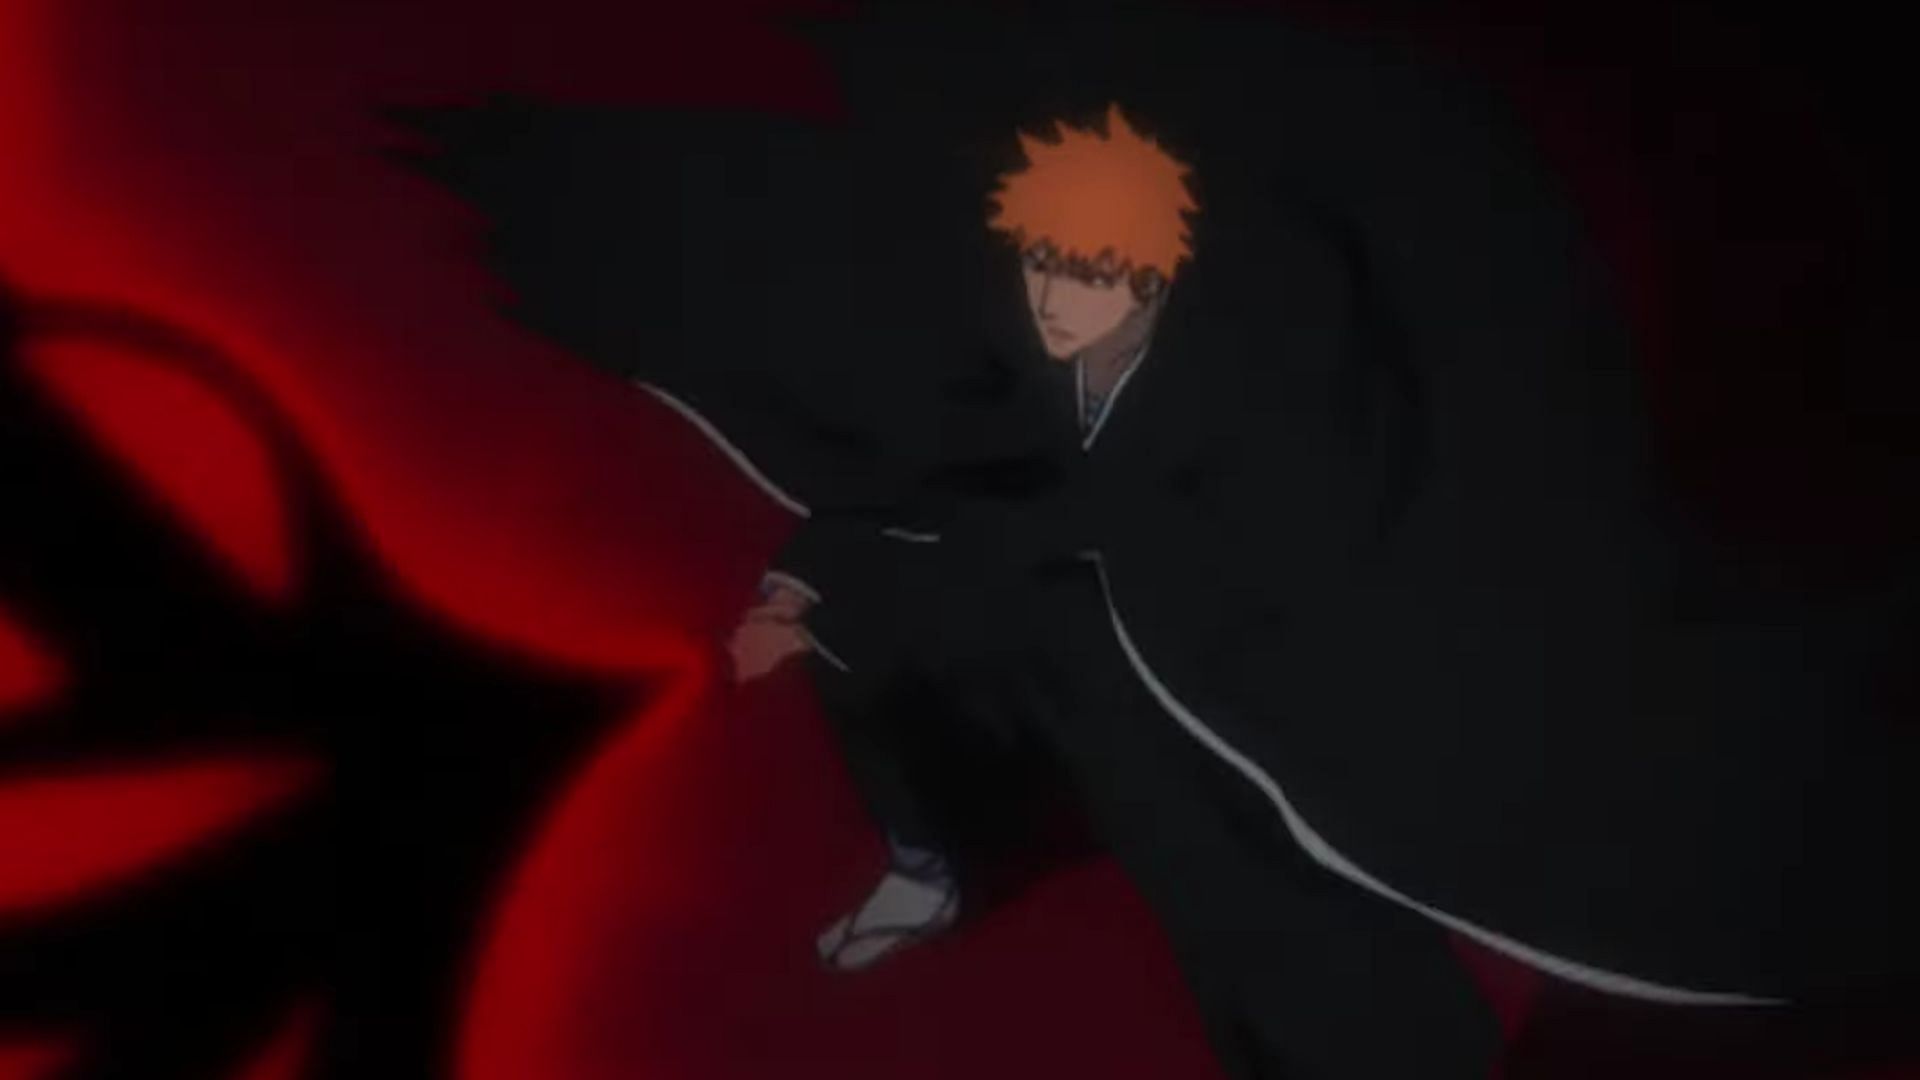 Bleach's Openings and Ending's OR Naruto's Opening and Ending's - Off-Topic  - Comic Vine